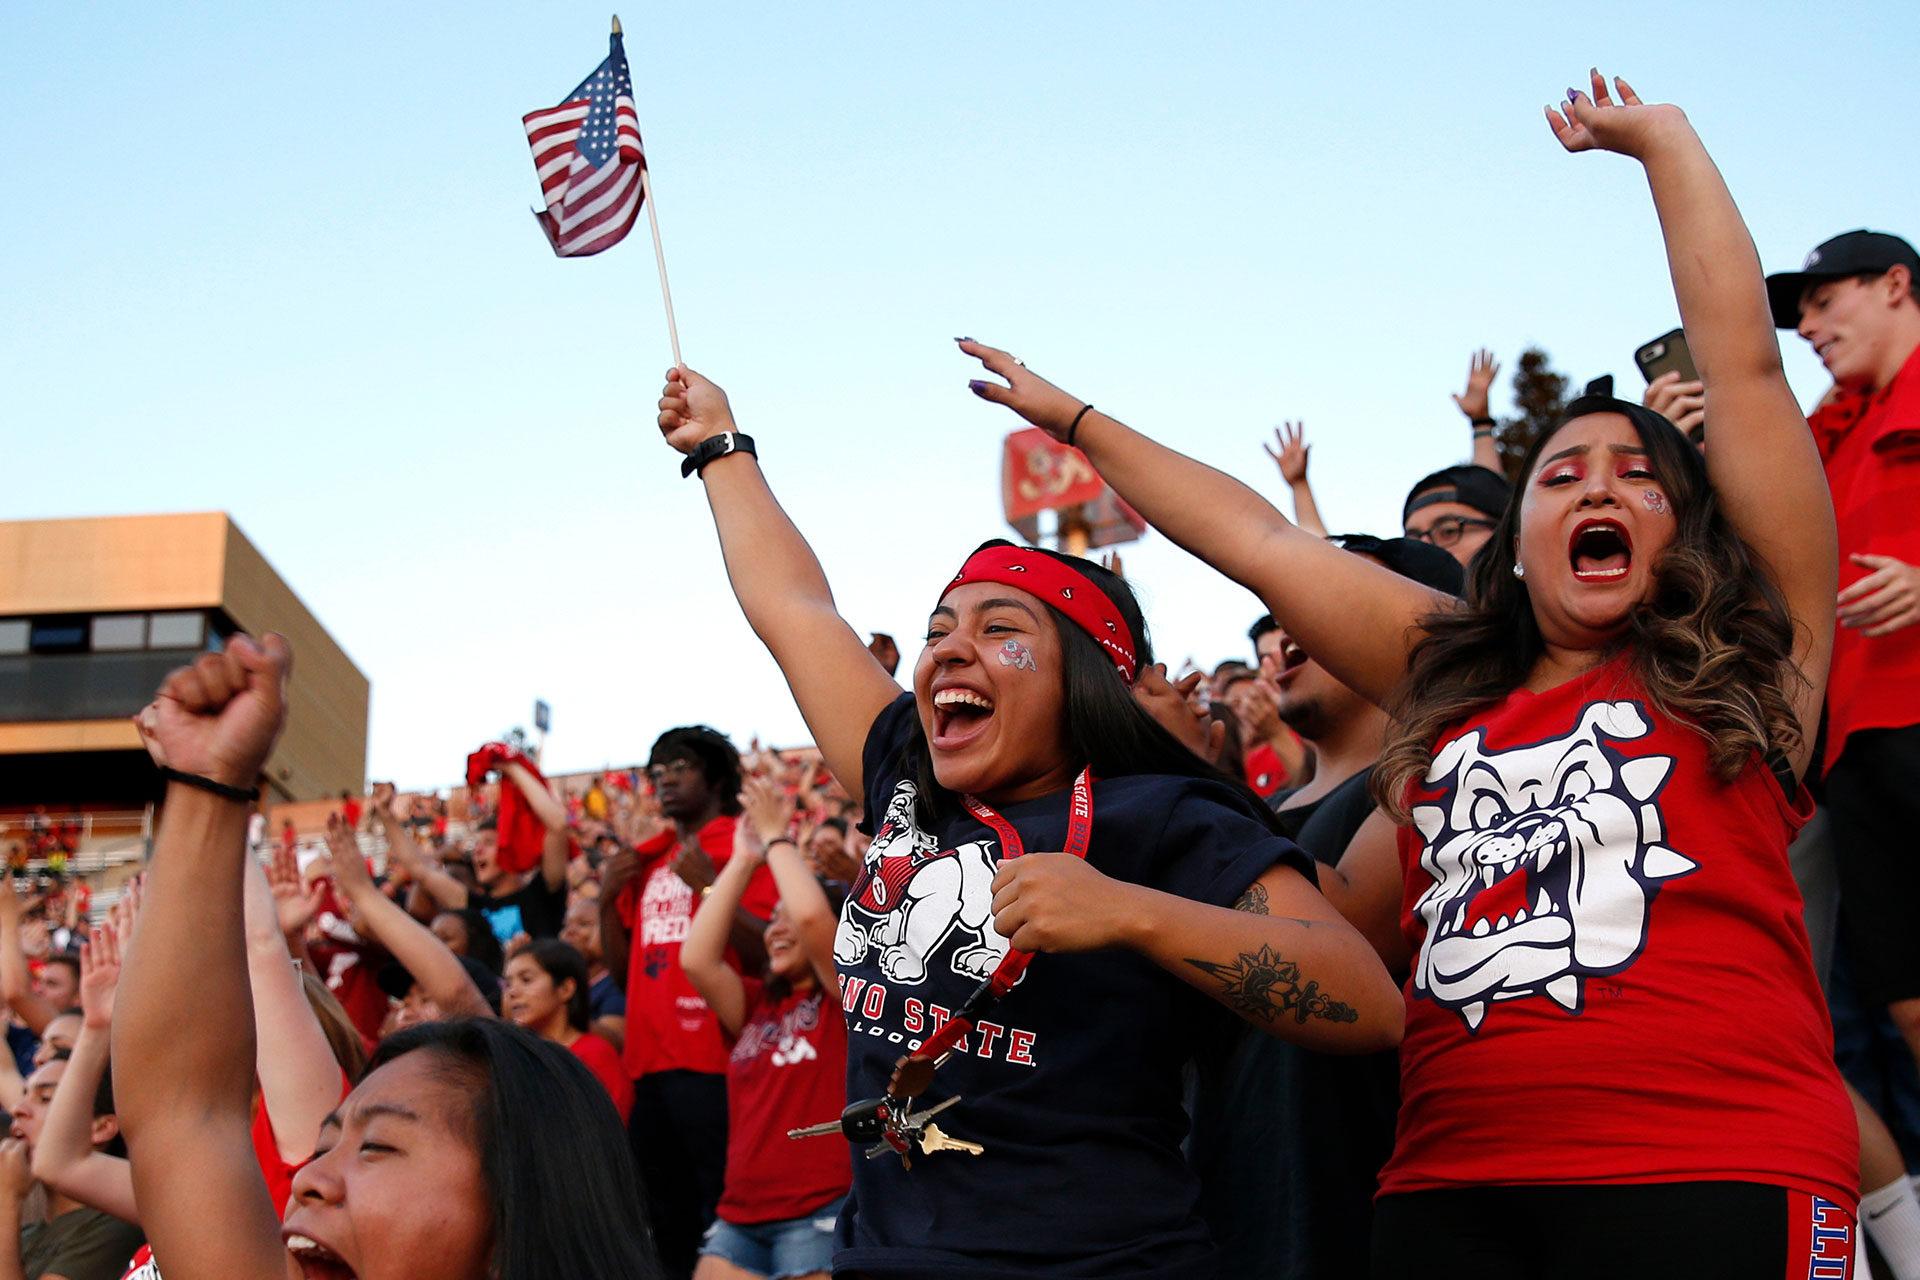 Students cheering on the ’Dogs at a home football game